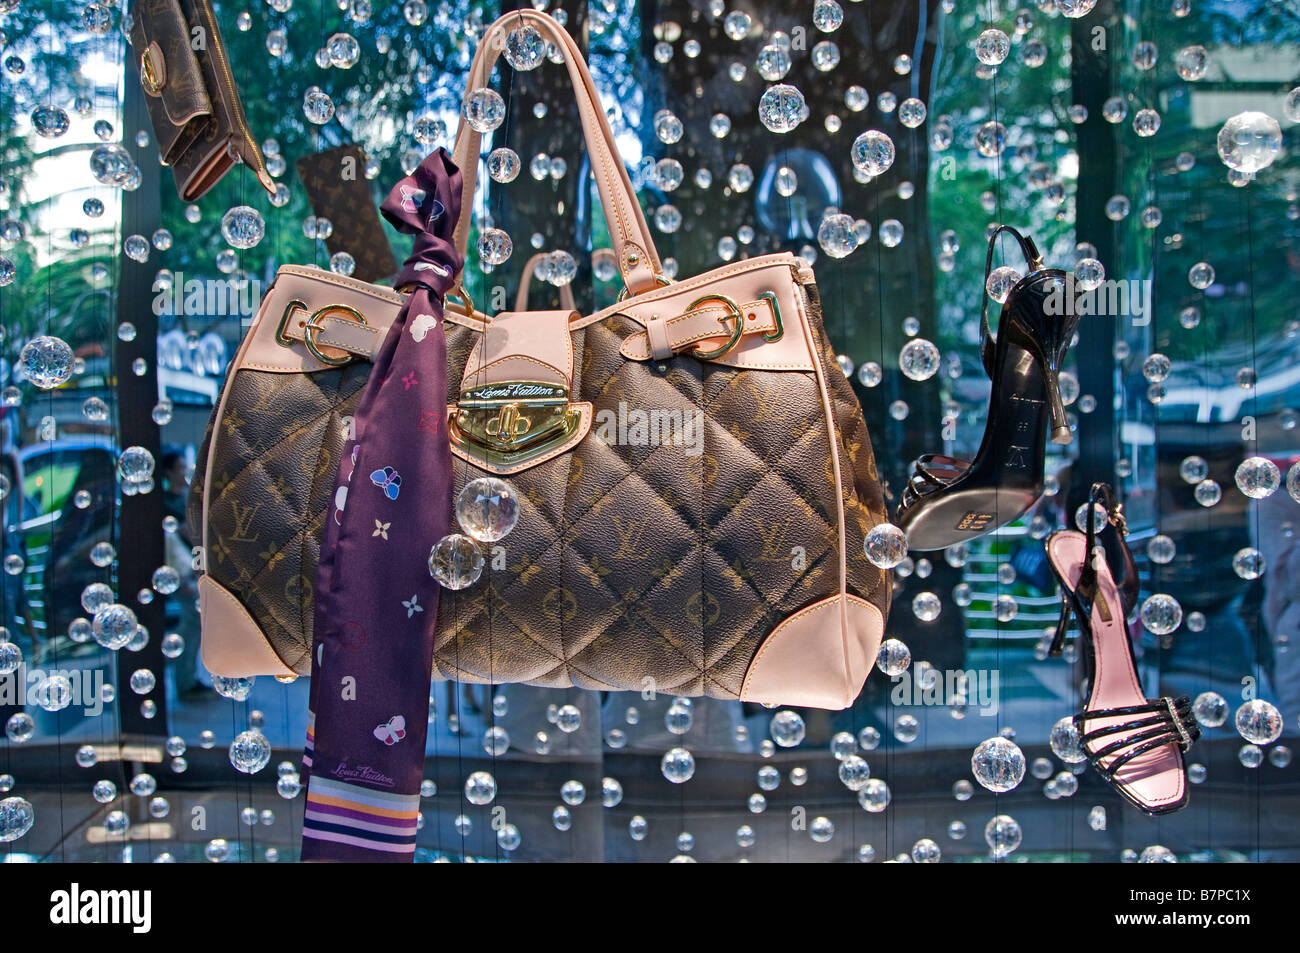 Louis Vuitton bag show window display Singapore Orchard road modern fashion luxury shopping mall shop shops stores Stock Photo -